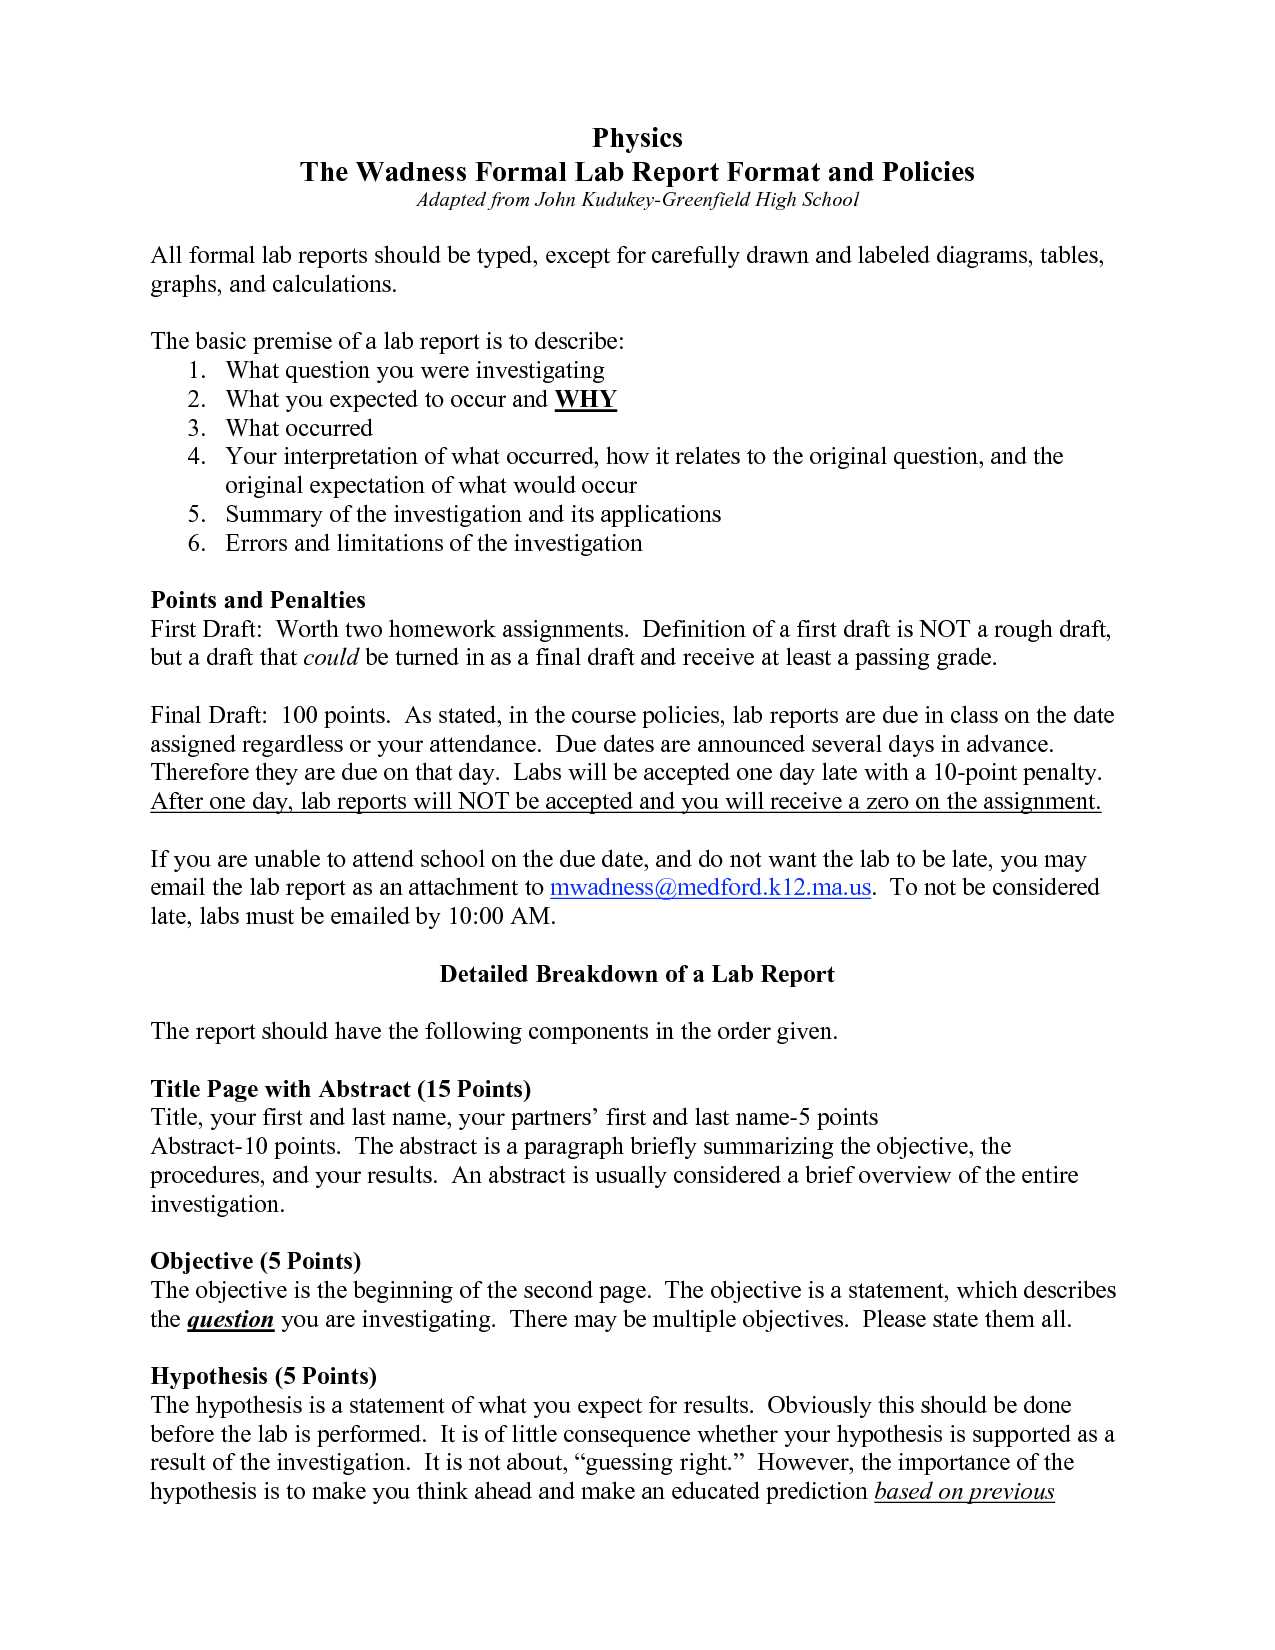 Formal Lab Report Template Physics : Biological Science Intended For Physics Lab Report Template